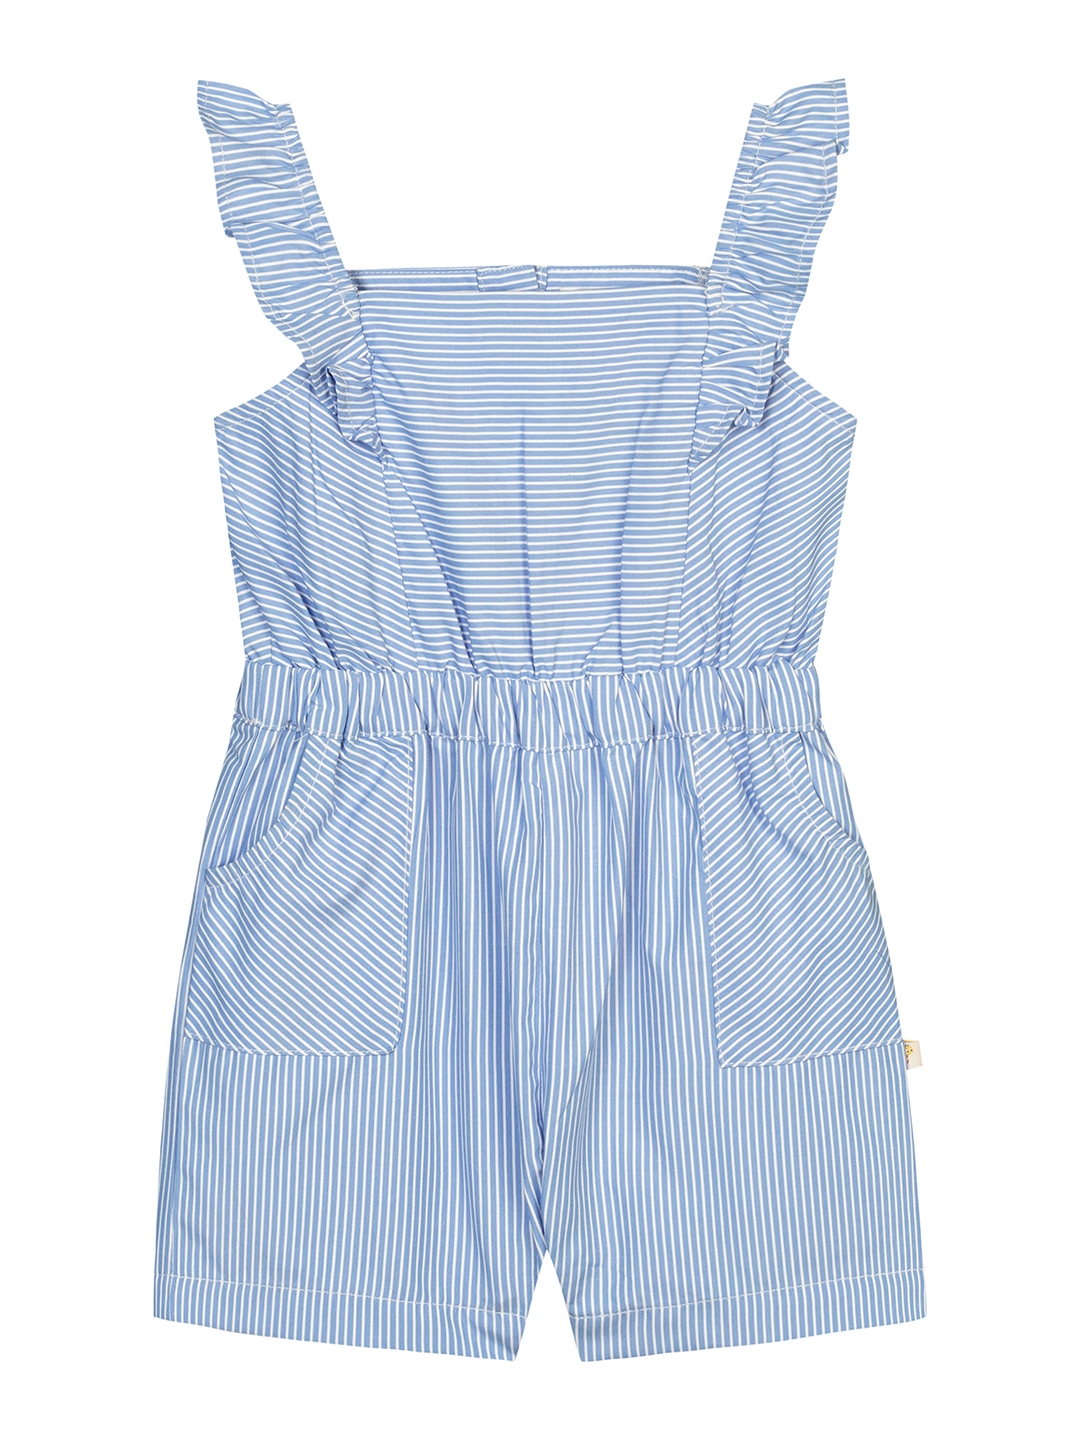 Budding Bees | Budding Bees Baby Girls Blue Striped Playsuit